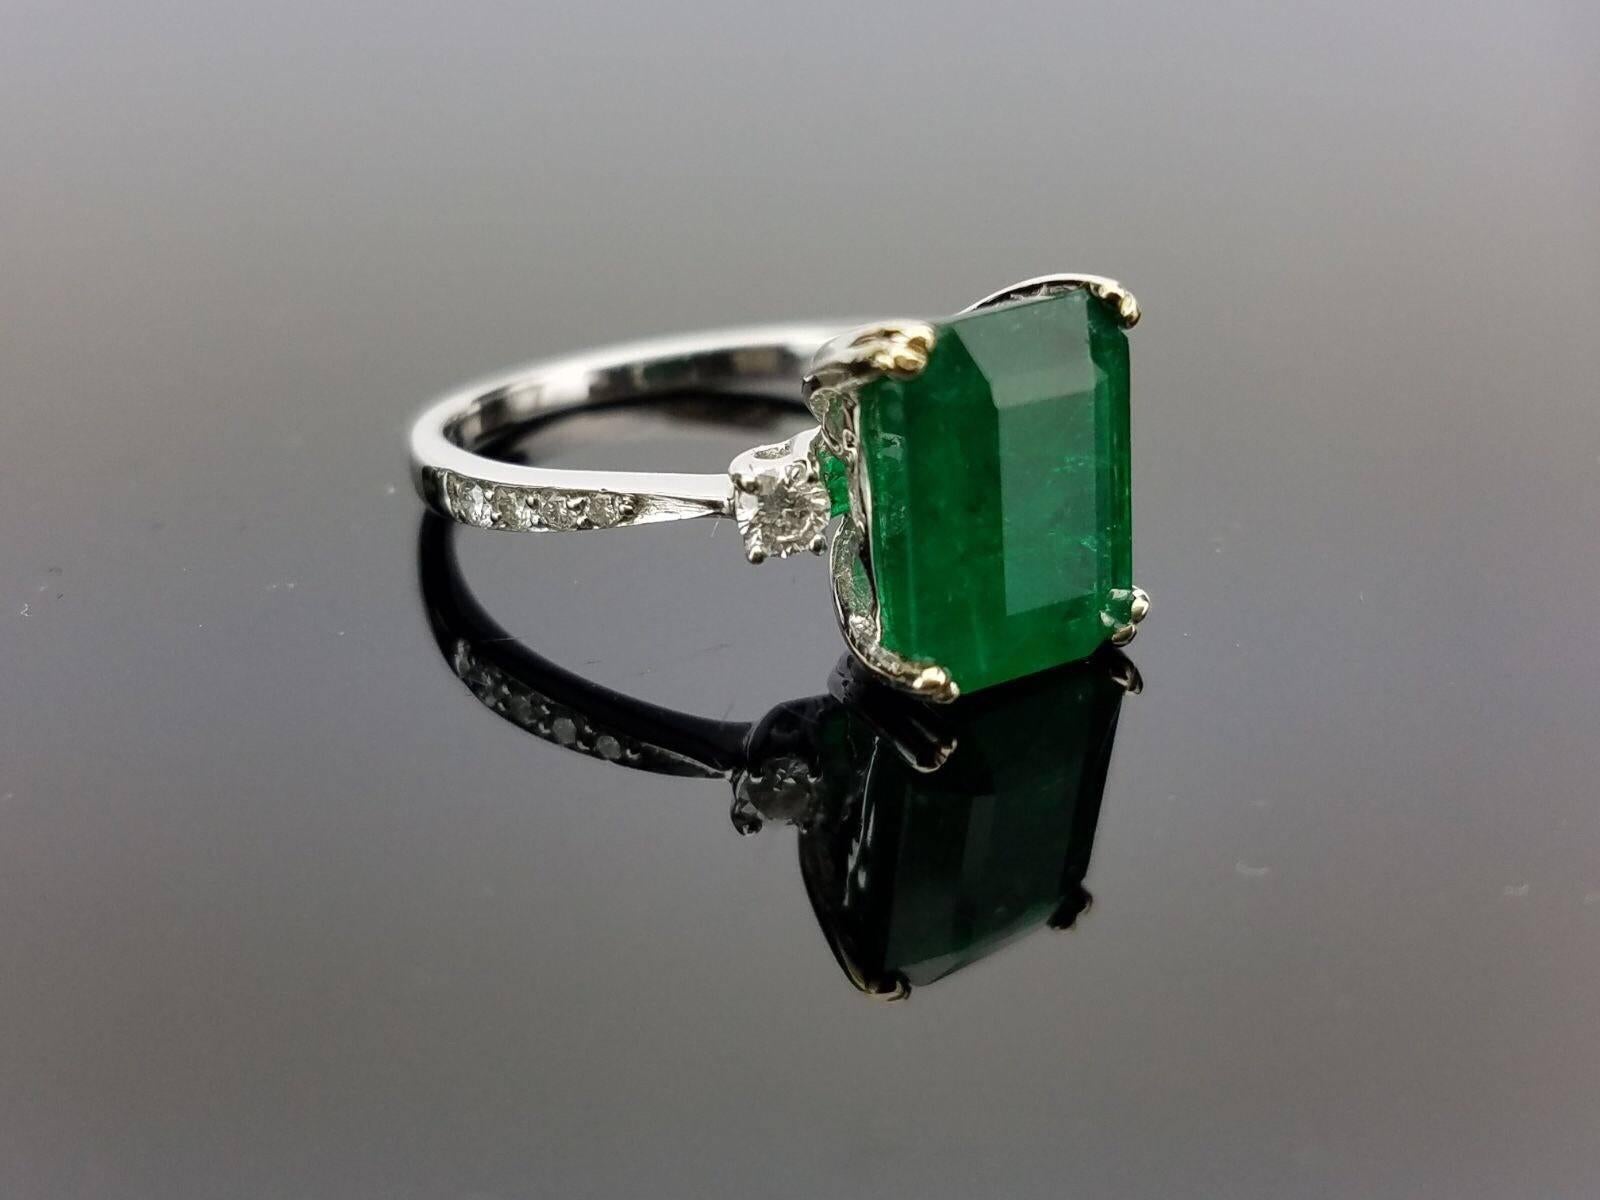 Classic Zambian Emerald with Diamond Ring on 18K Diamond studded White Gold Band

Center Stone Details: 
Stone: Zambian Emerald
Cut: Emerald Cut
Weight: 3.29 carat

Diamond Details: 
Cut: Brilliant (round)
Total Carat Weight: 0.2 carat
Quality: